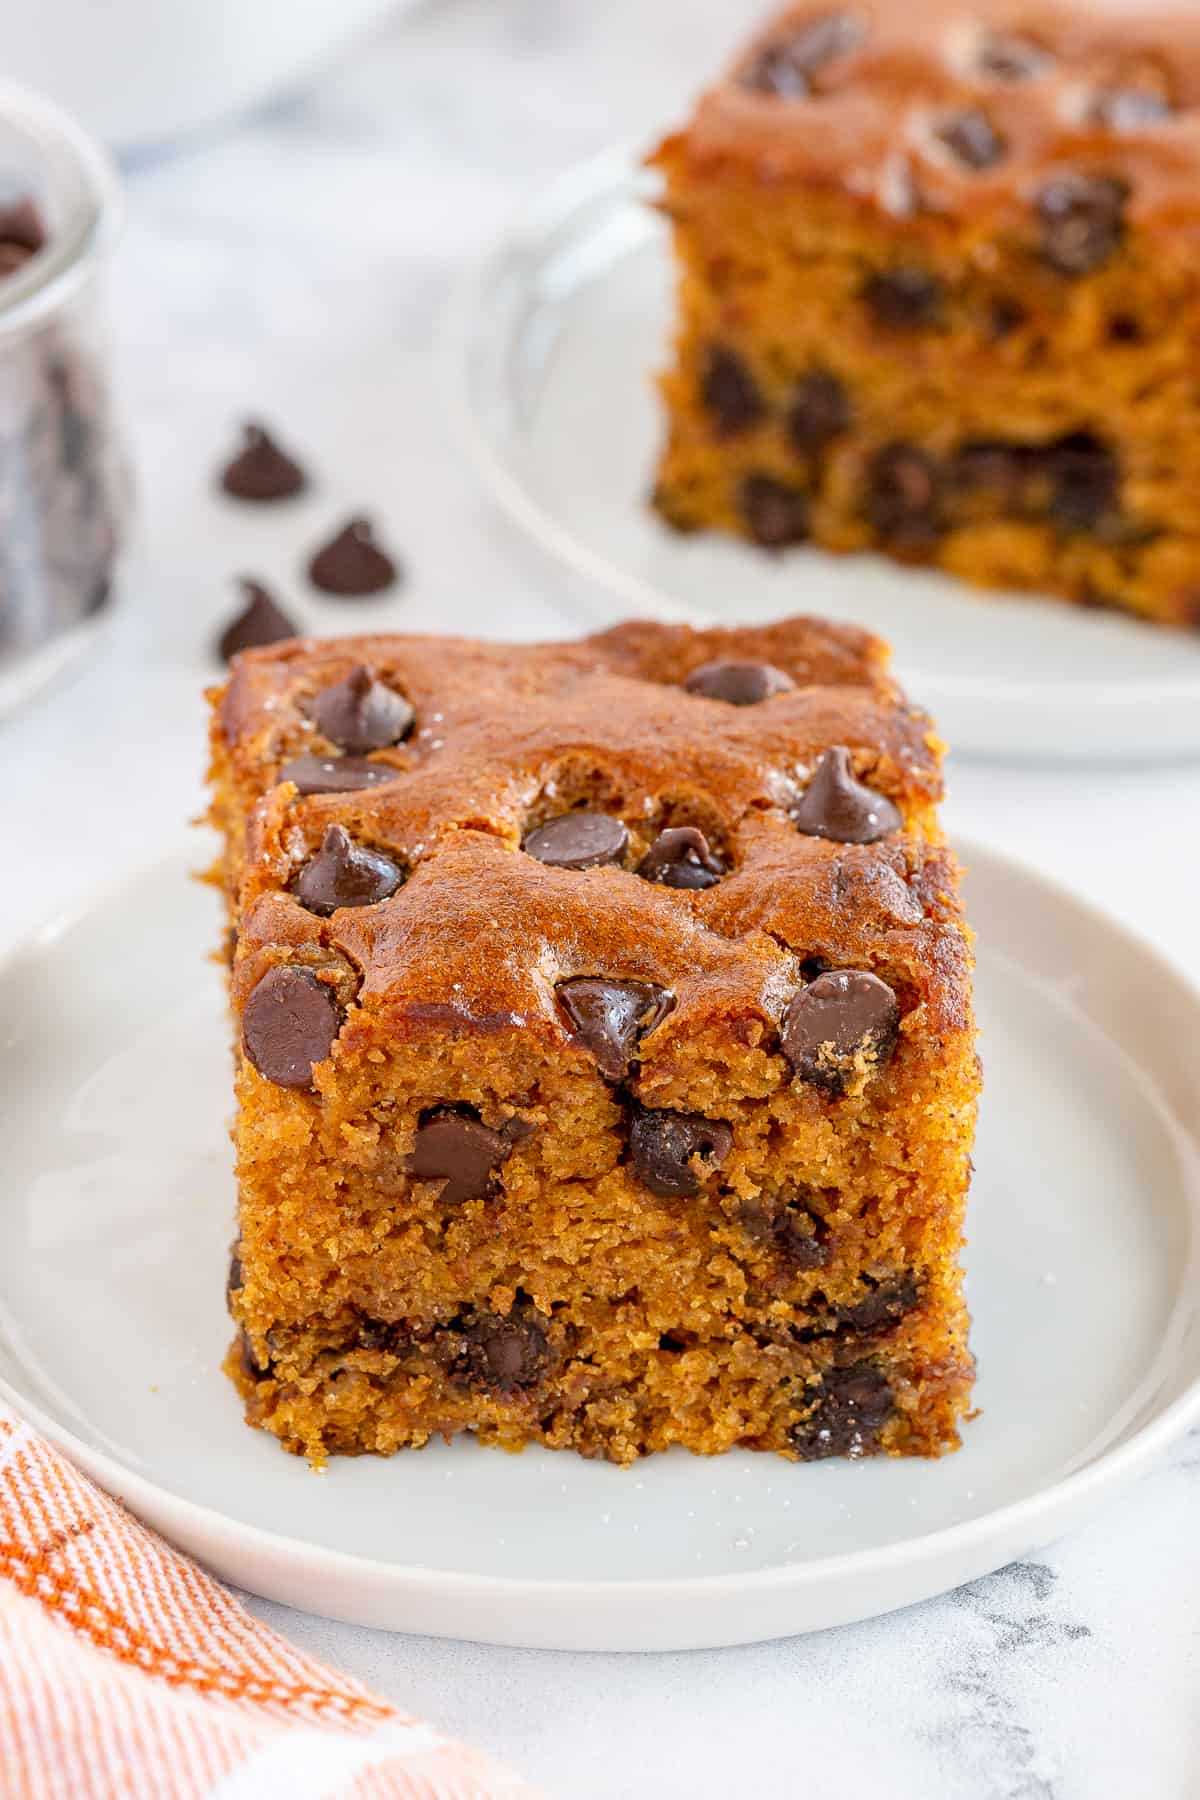 A slice of pumpkin chocolate chip cake on a white plate.